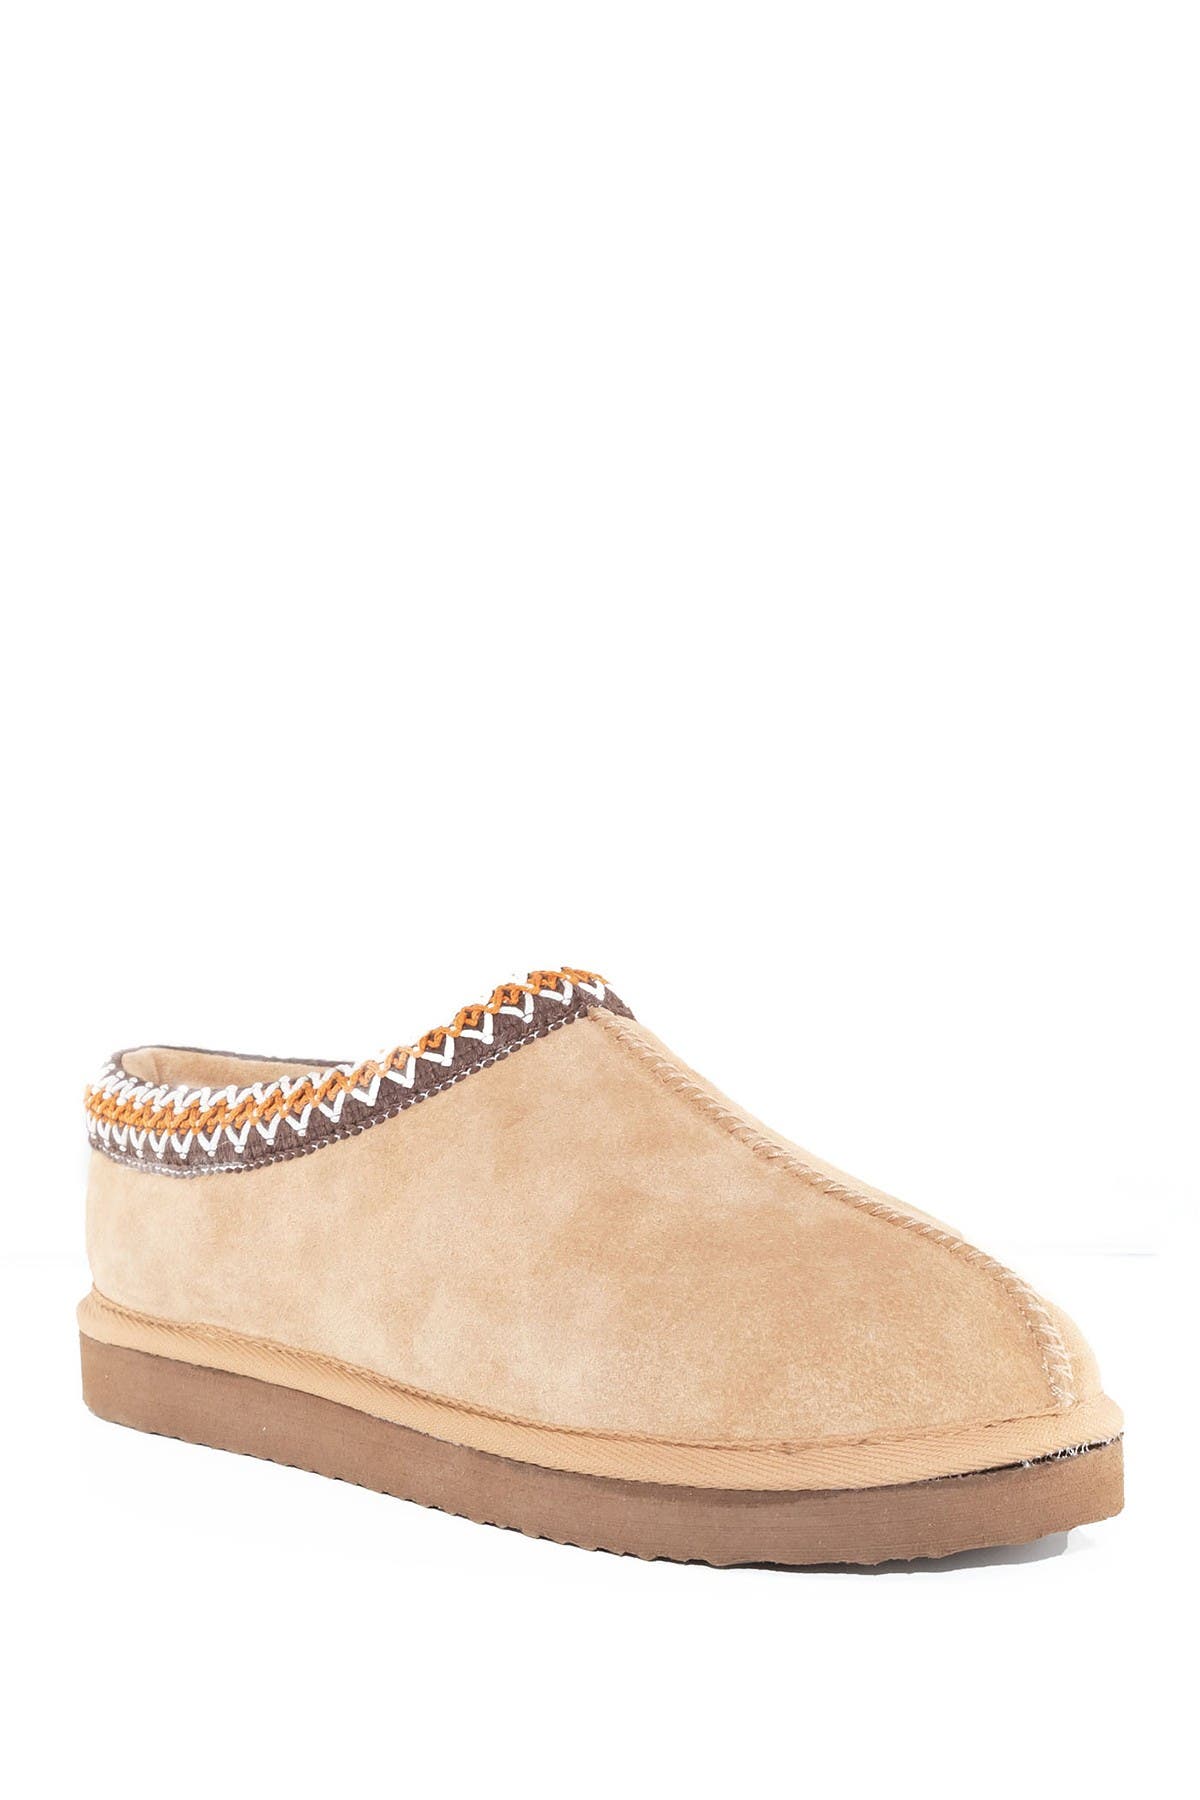 suede clog slippers